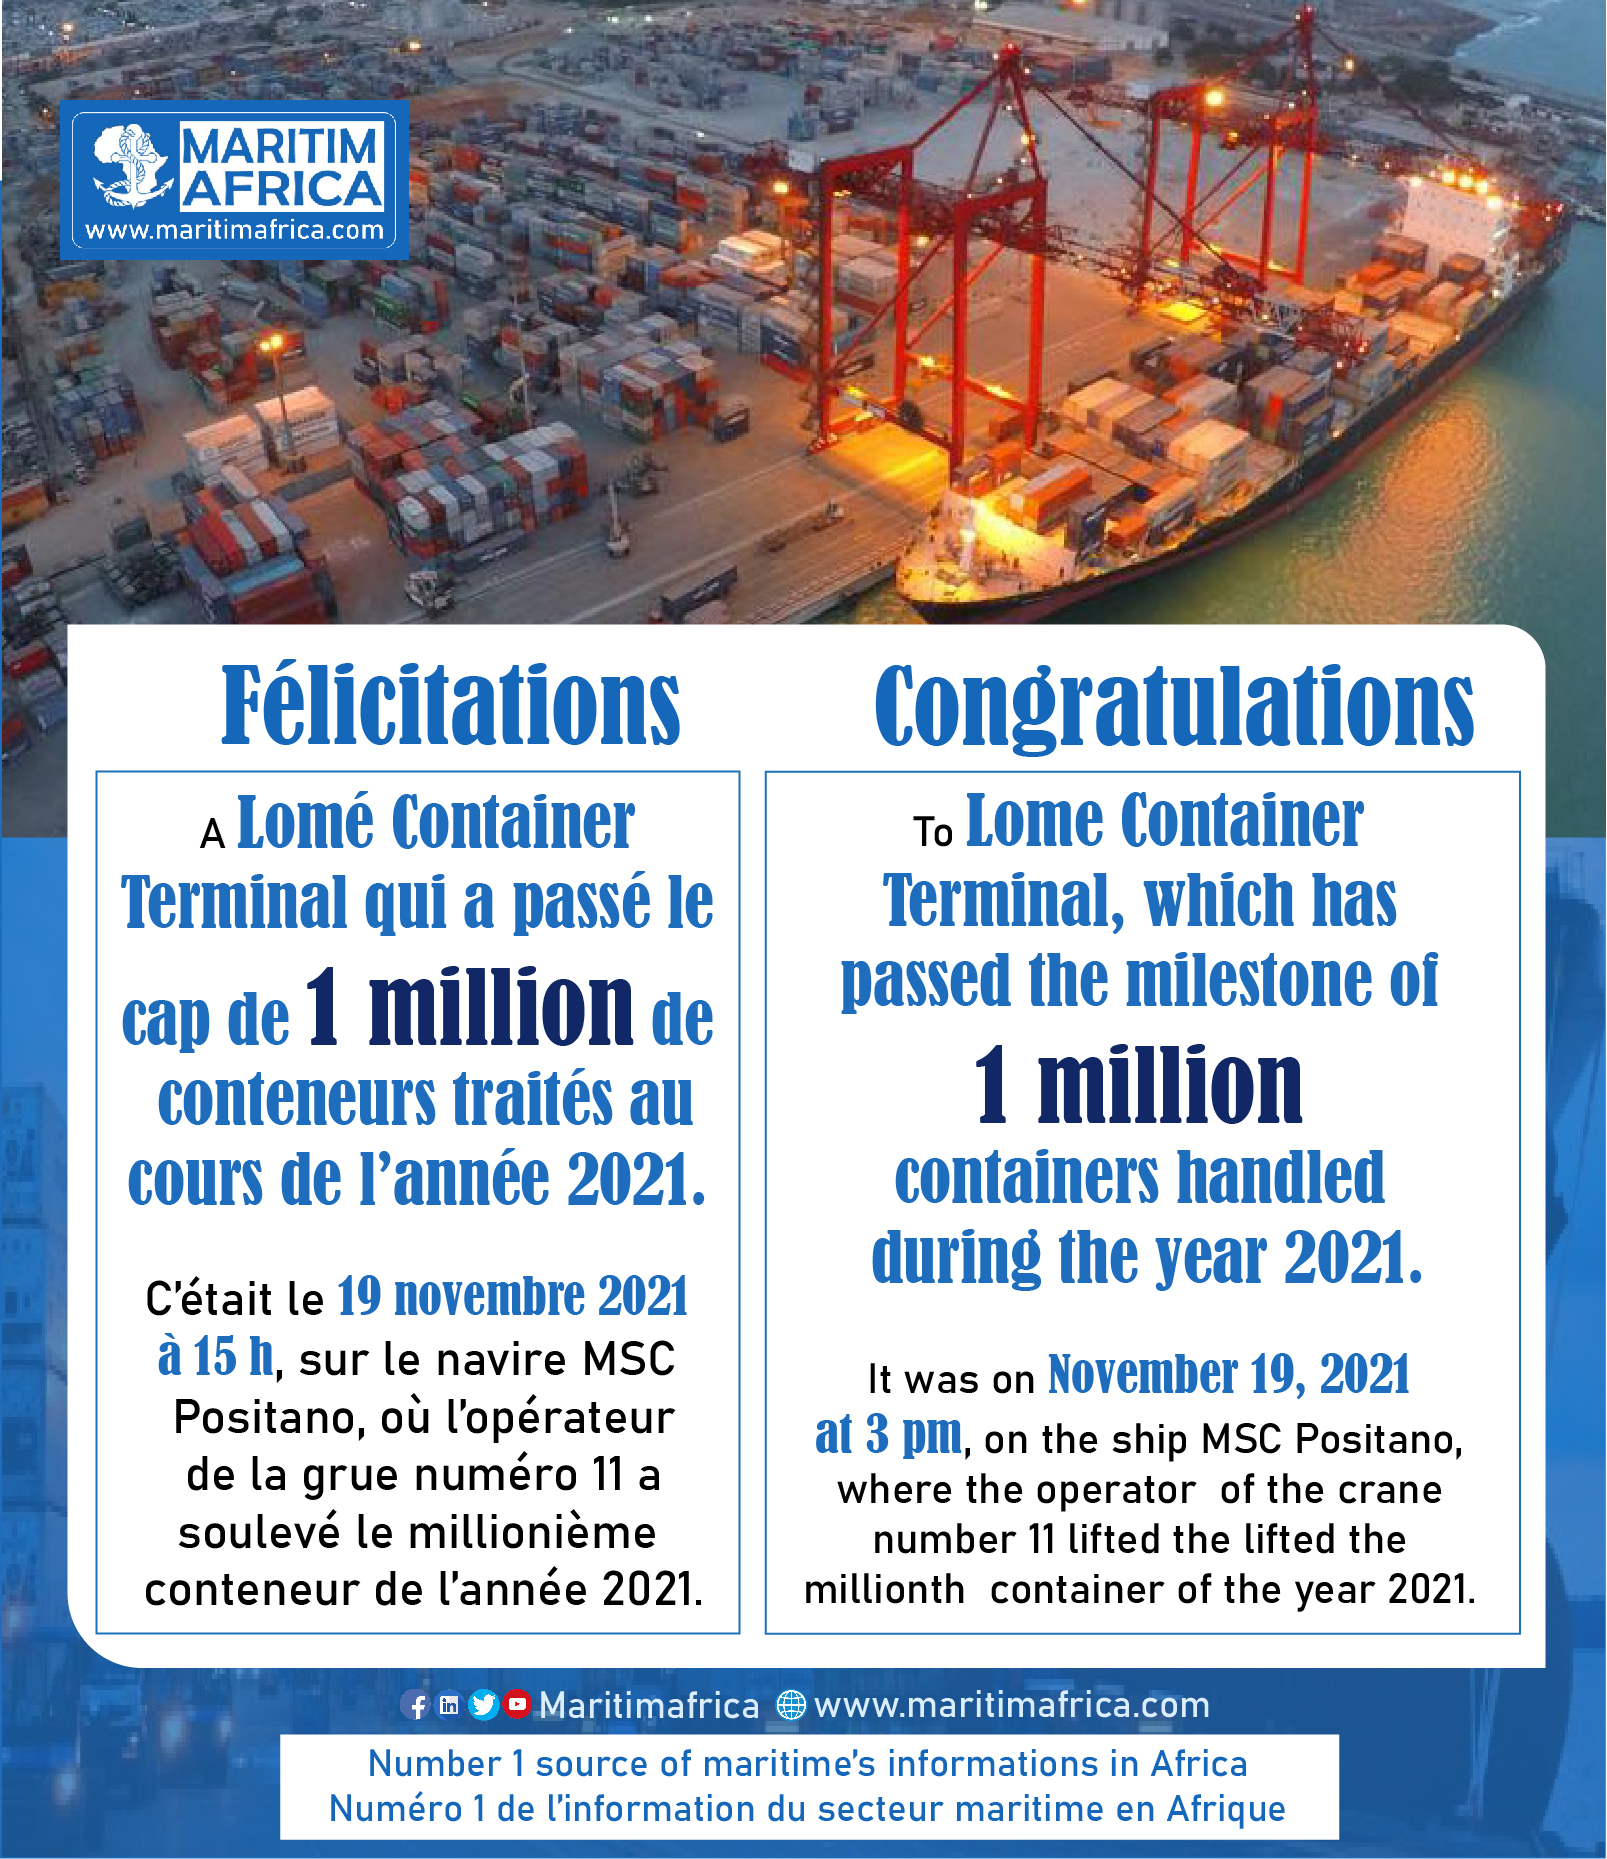 Lomé Container Terminal passes the milestone of 1 million containers handled during the year 2021